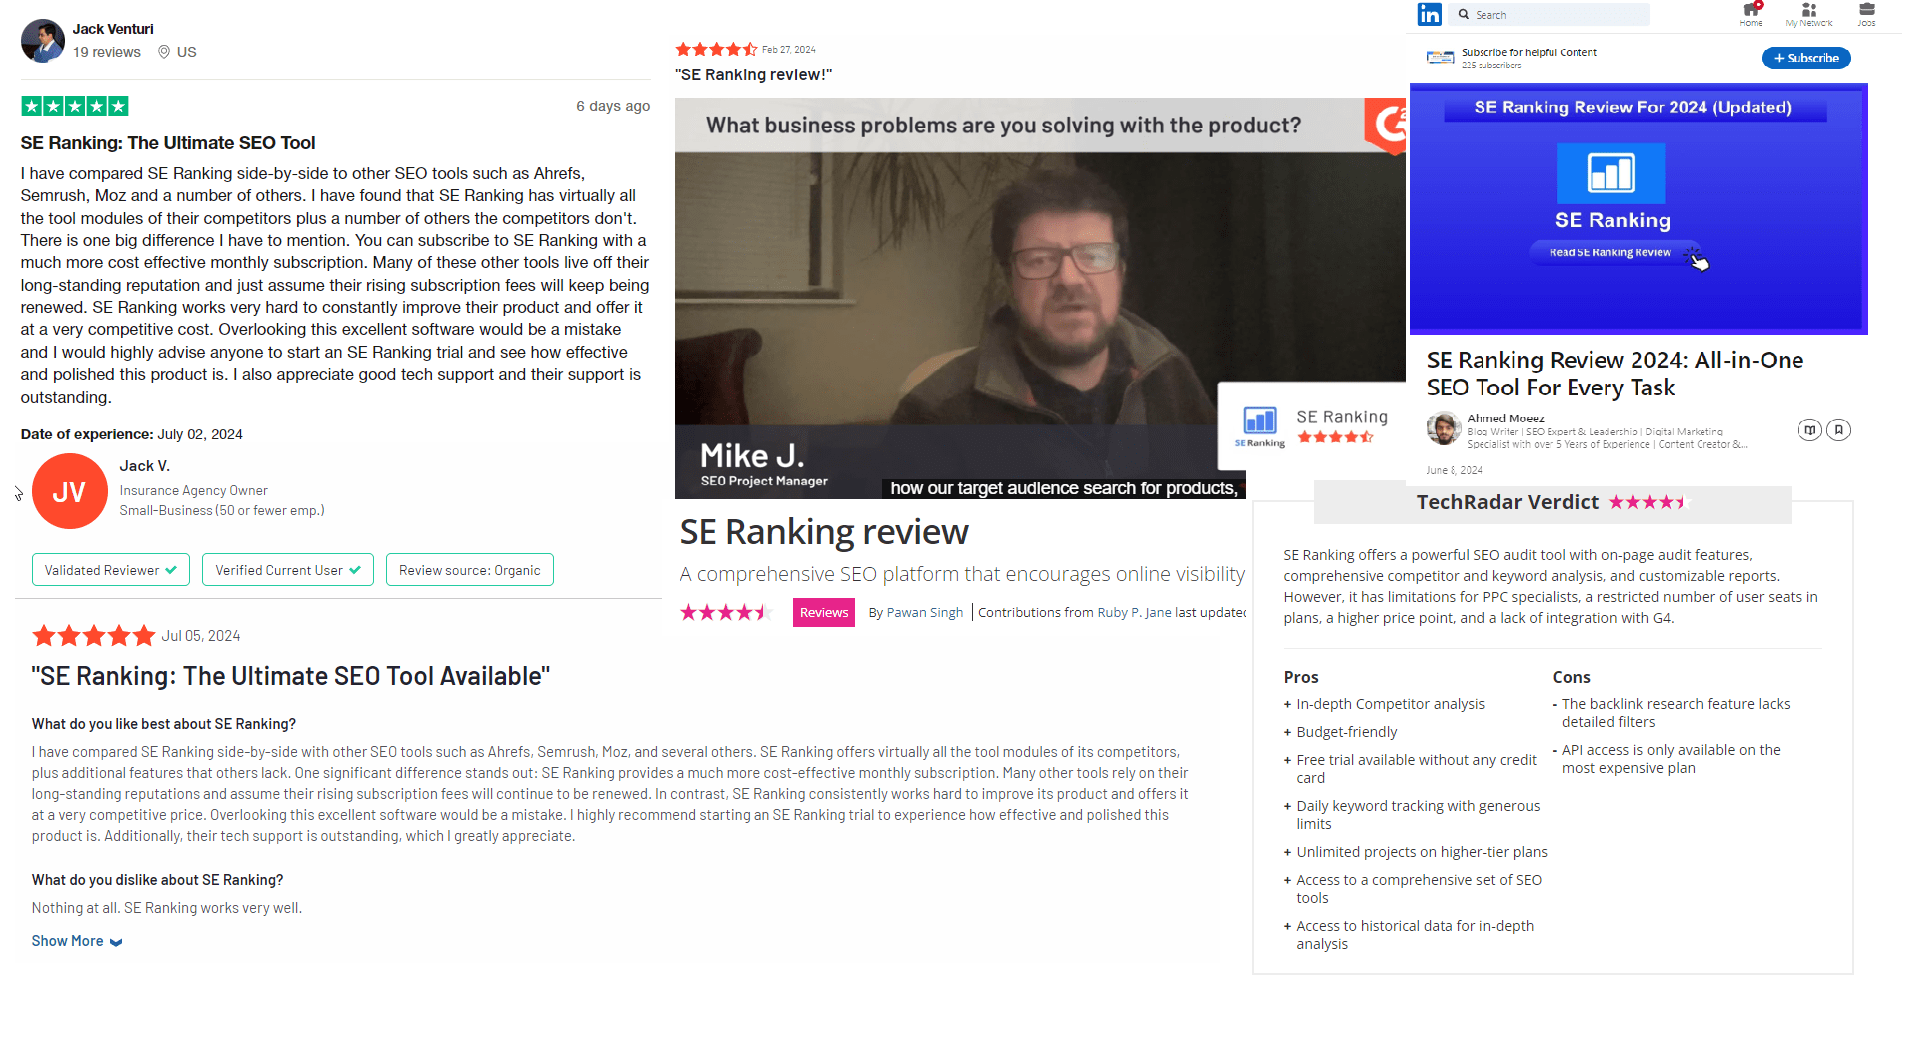 Collage of SE Ranking reviews